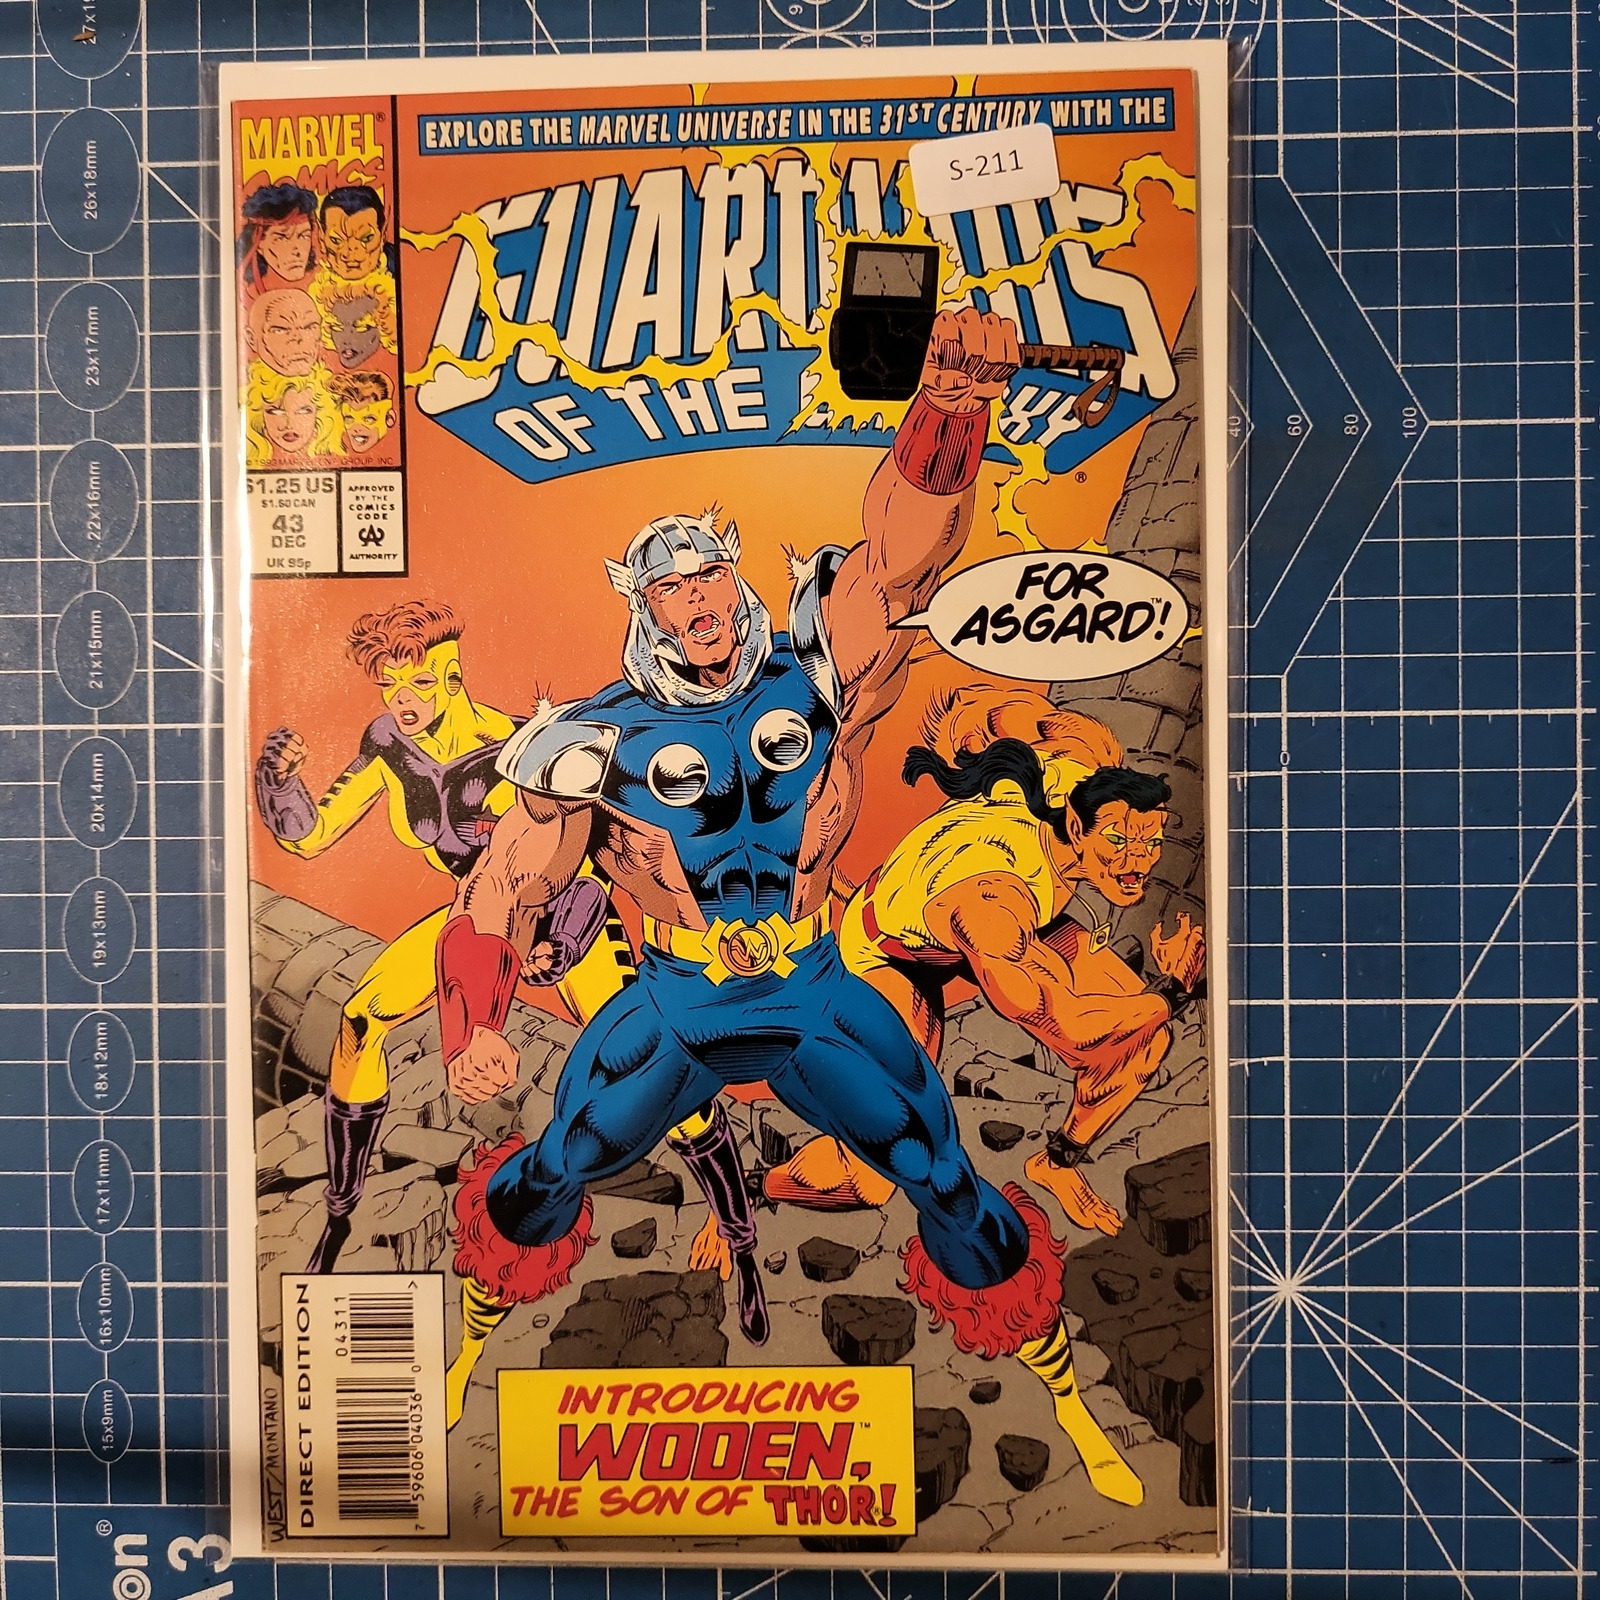 GUARDIANS OF THE GALAXY #43 VOL. 1 9.0+ MARVEL COMIC BOOK S-211